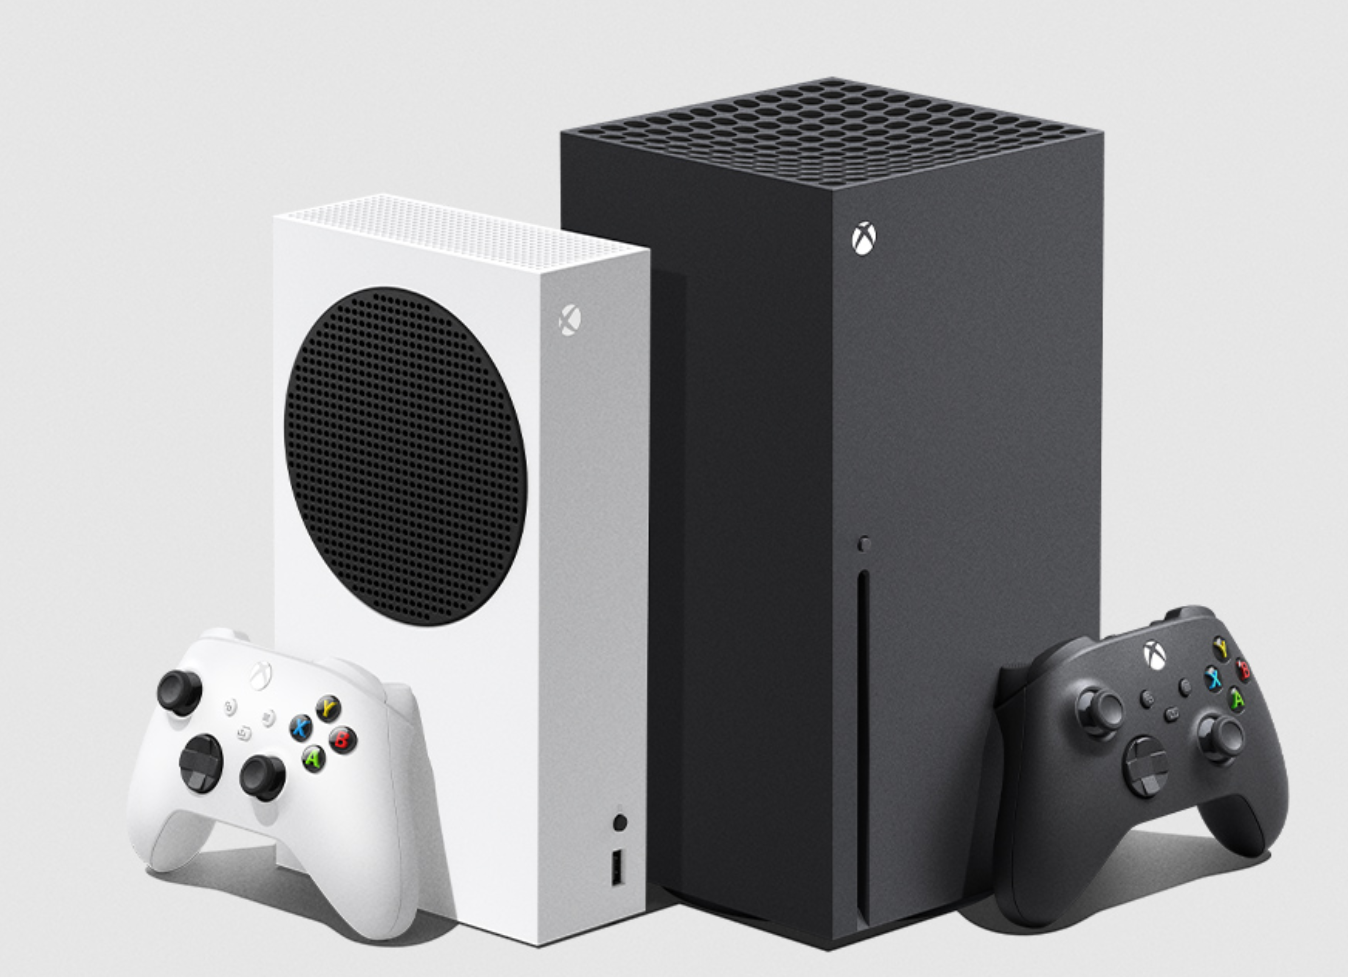 How to Tell if You’re Buying the New Xbox